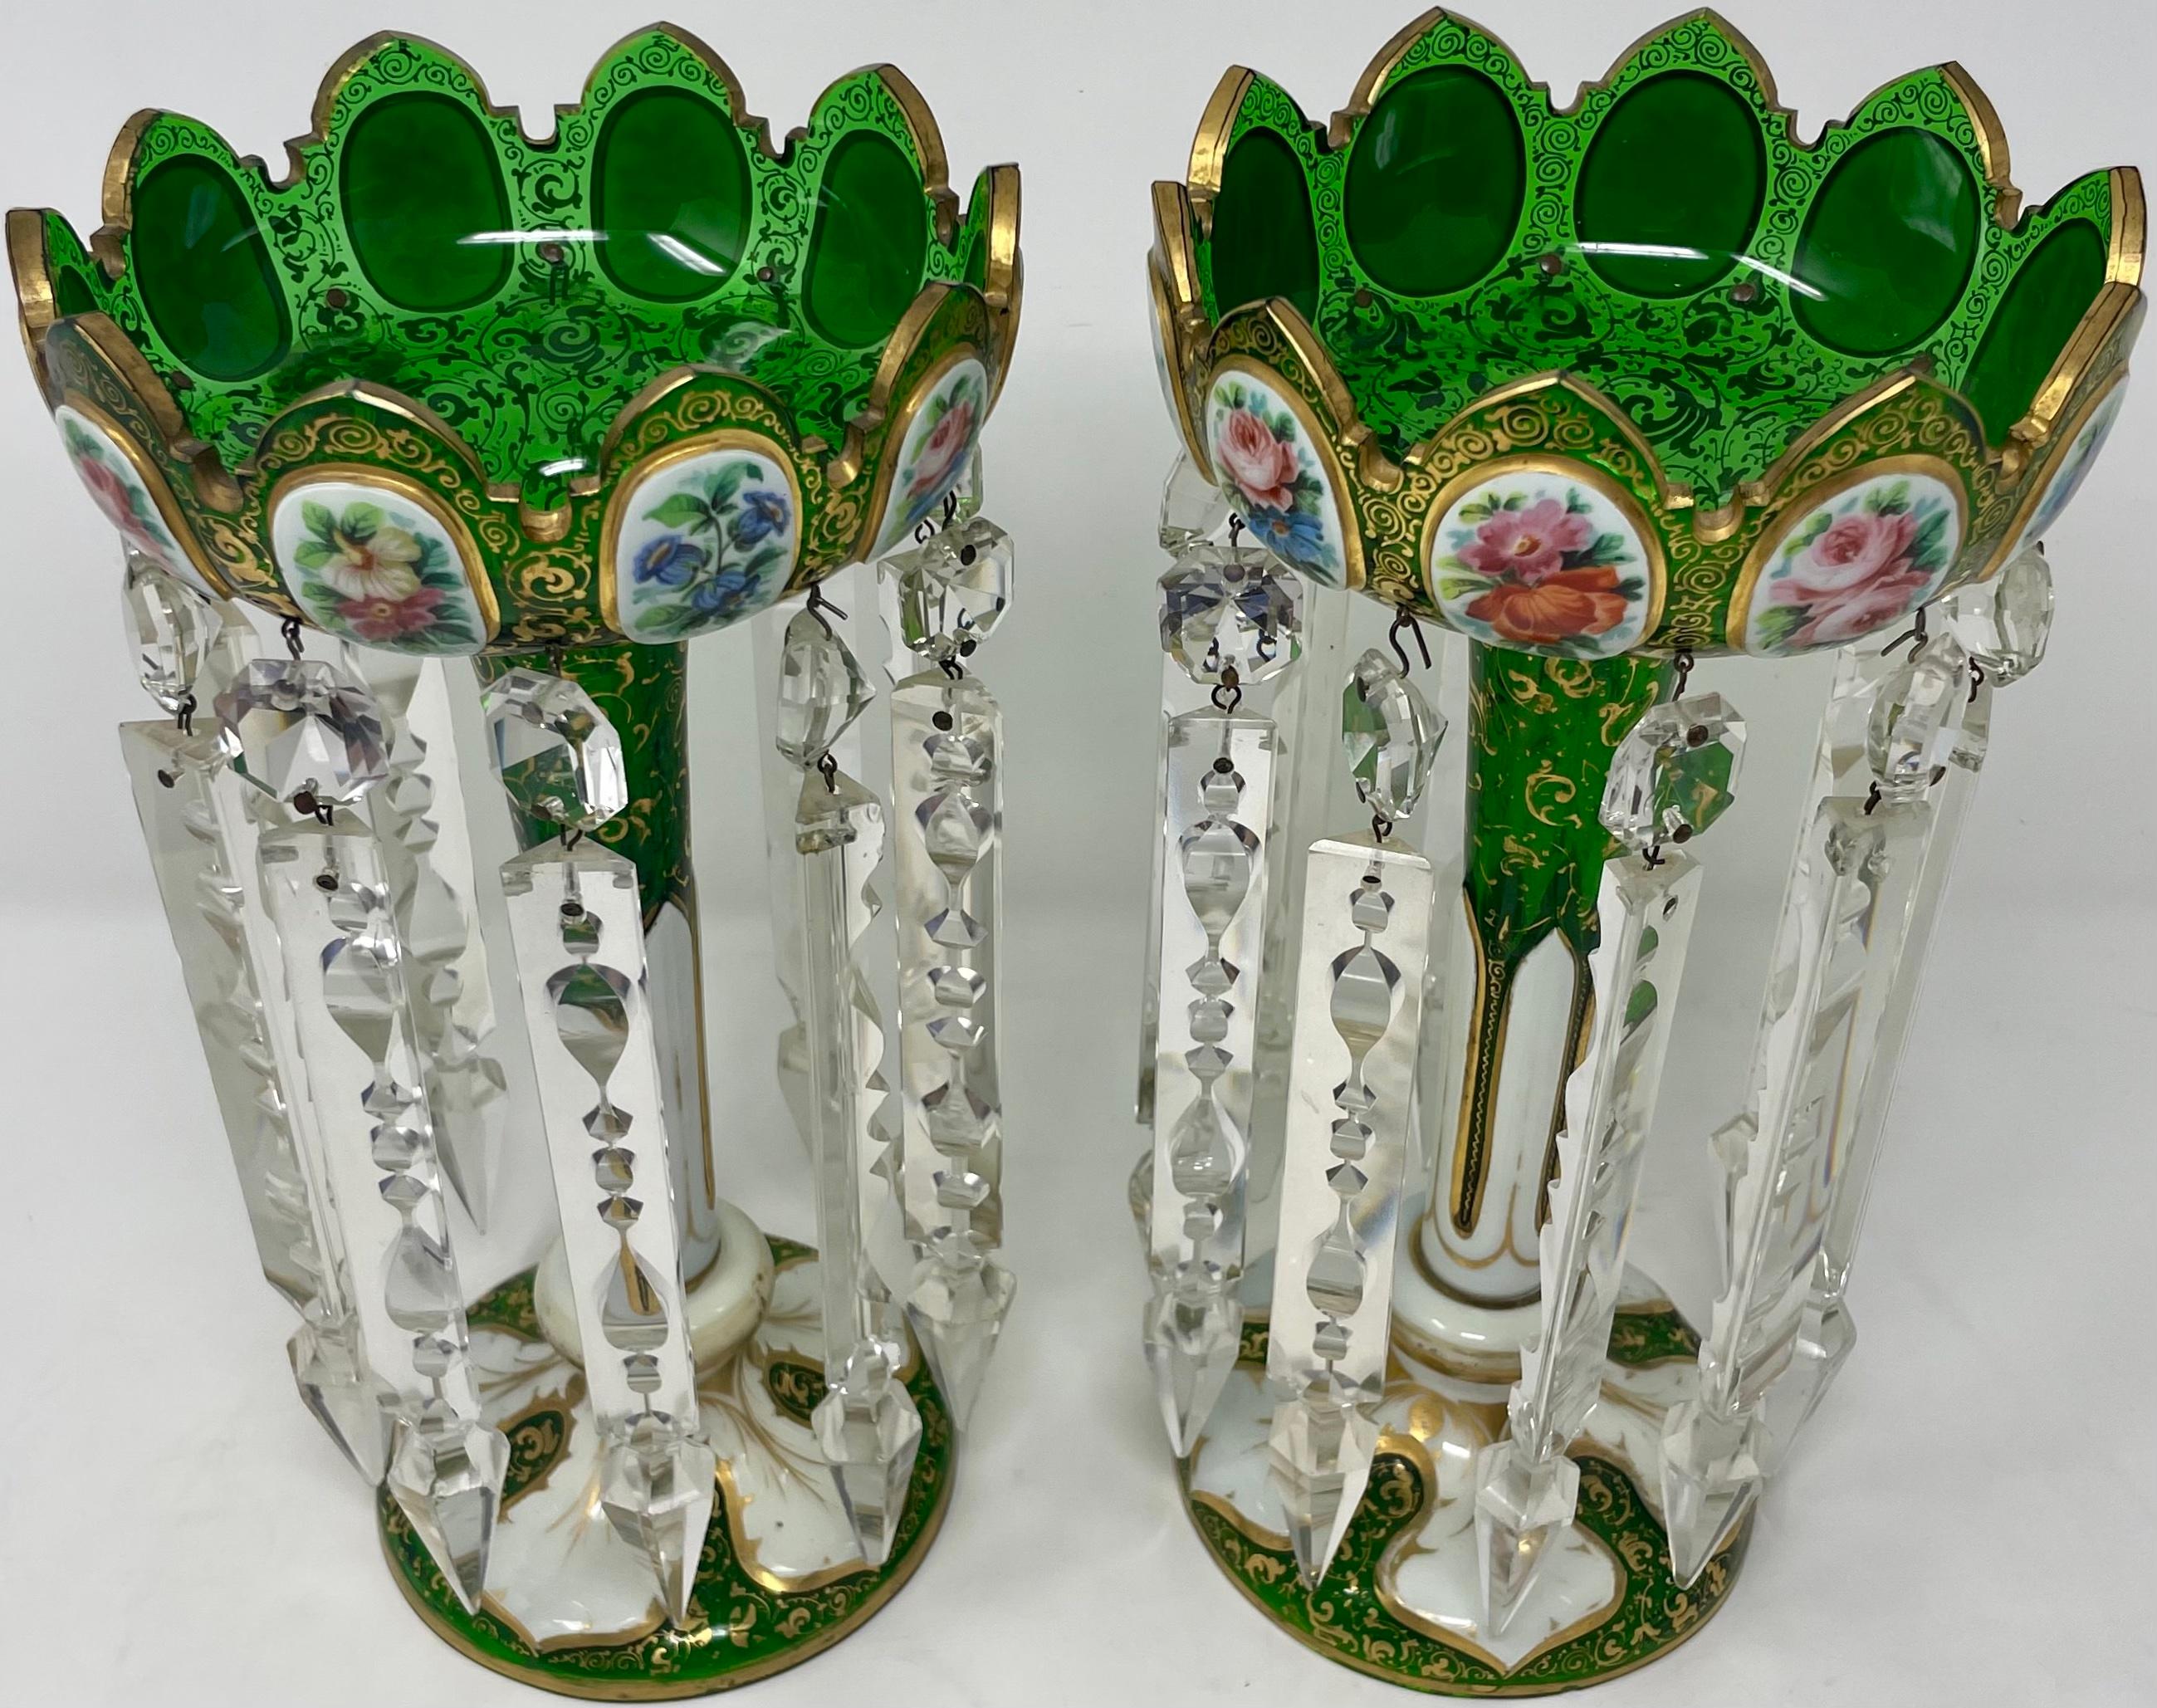 Exceptional pair Antique Bohemian green crystal with hand-painted gold and enamel porcelain candle lusters, circa 1865-1885.